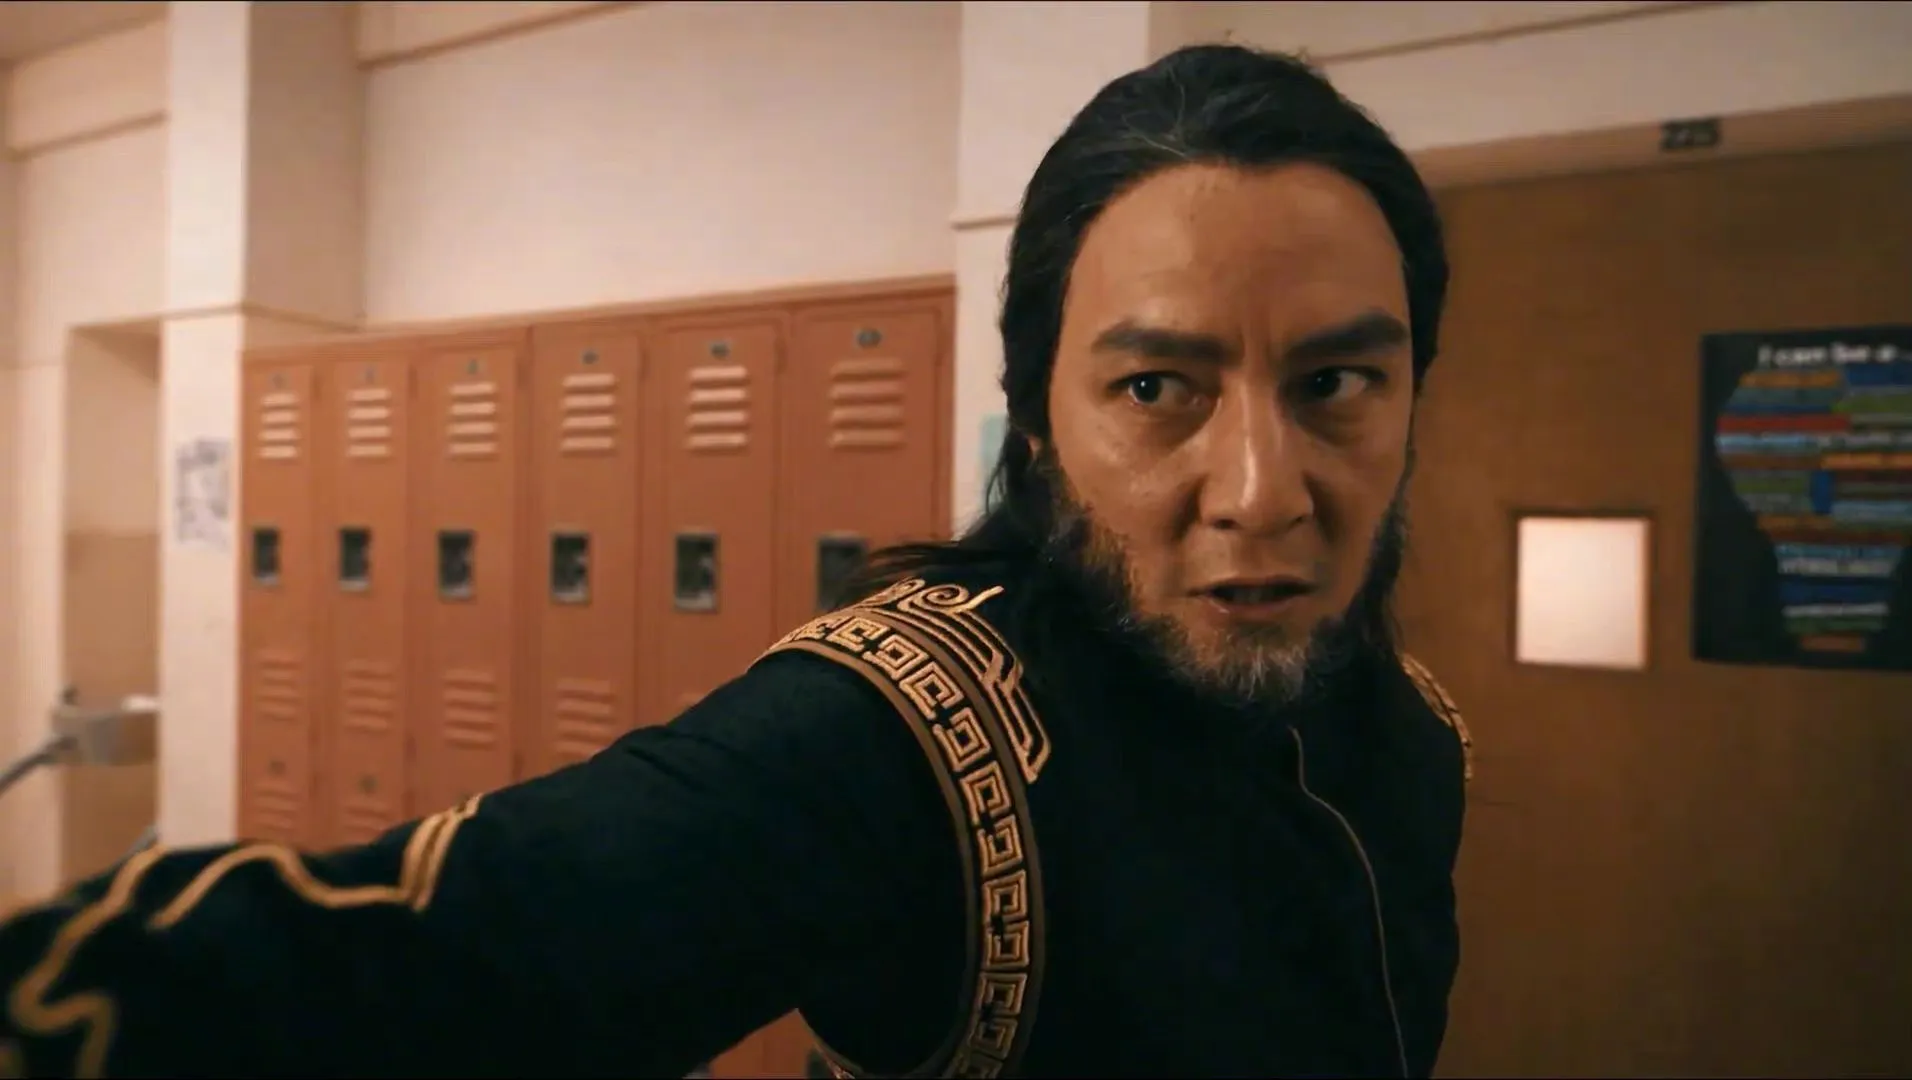 The look of The Monkey King played by Daniel Wu in ‘American Born Chinese’ | FMV6